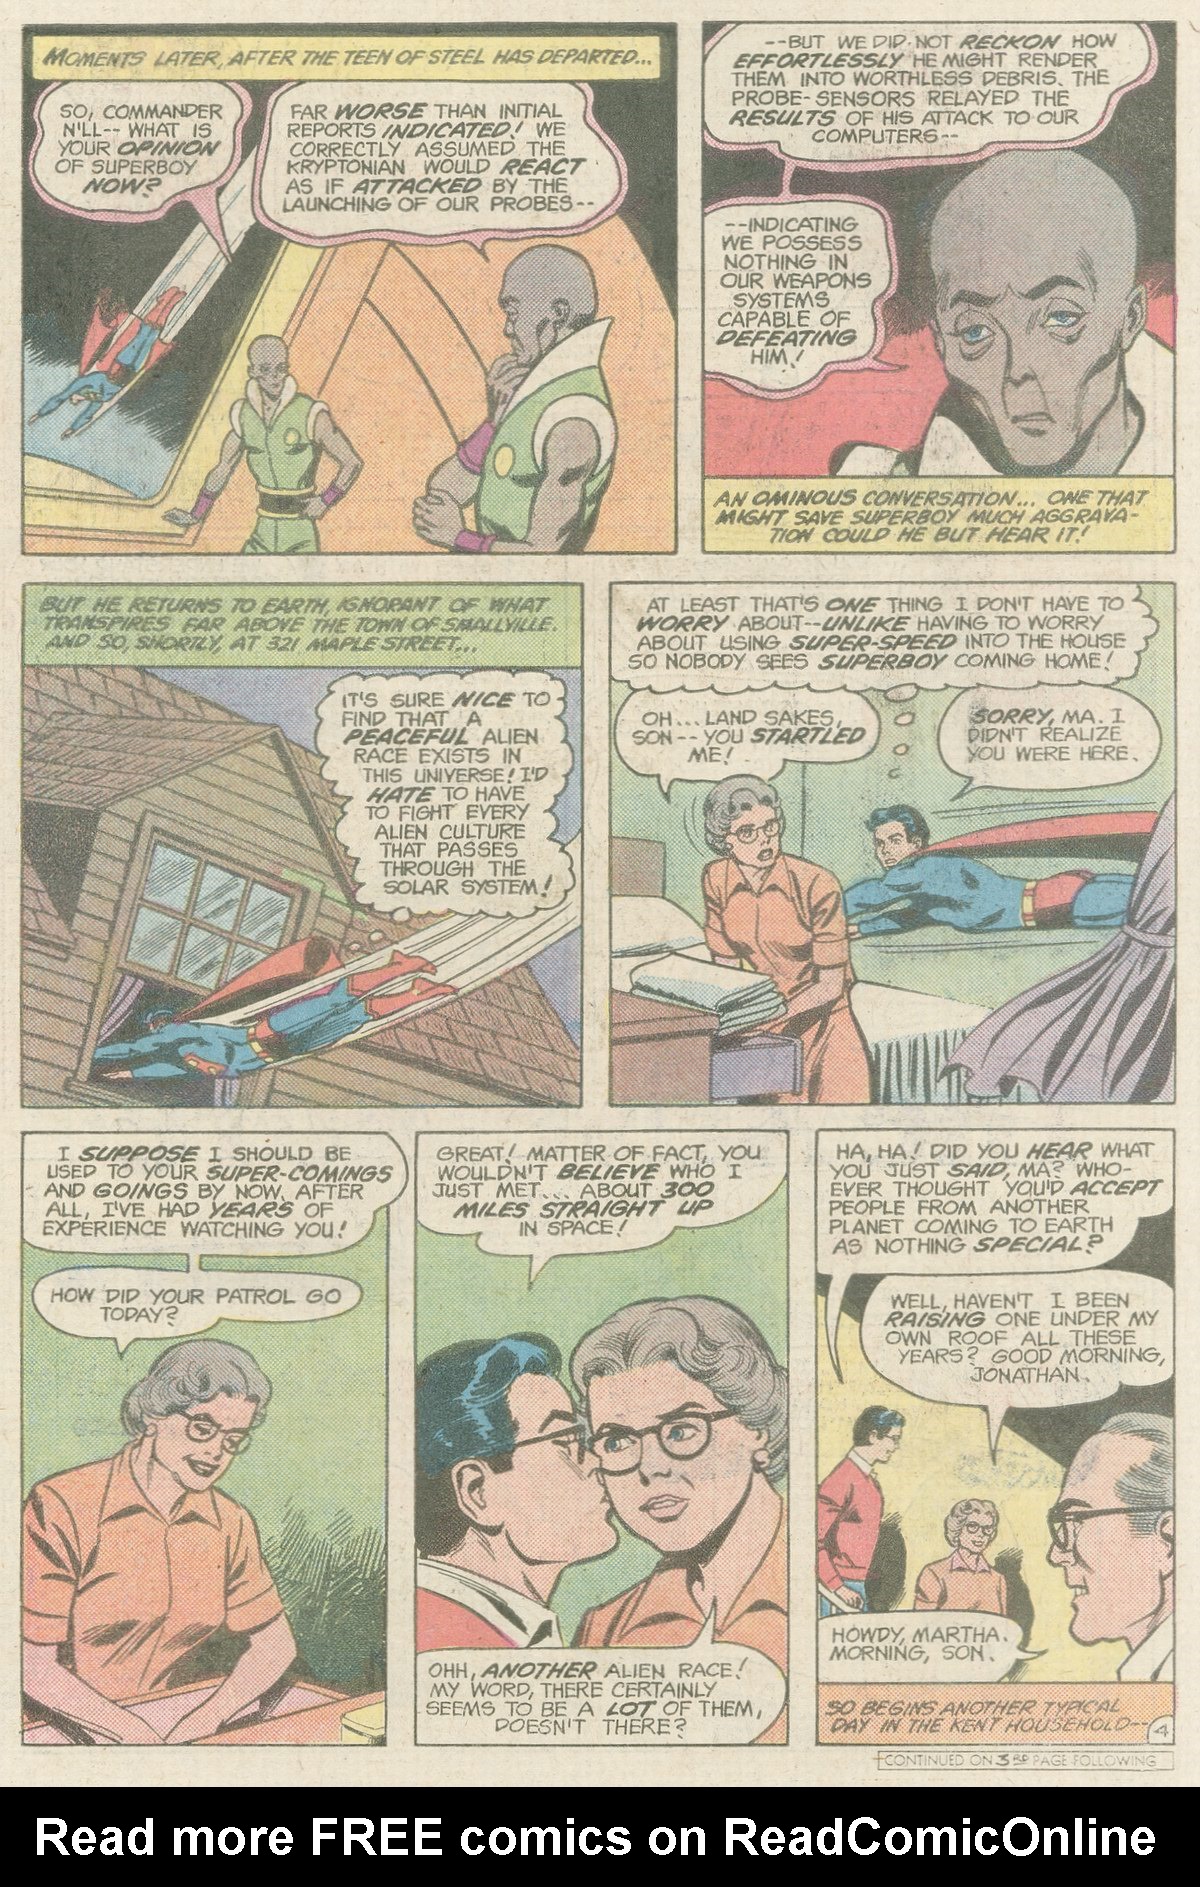 The New Adventures of Superboy 40 Page 4